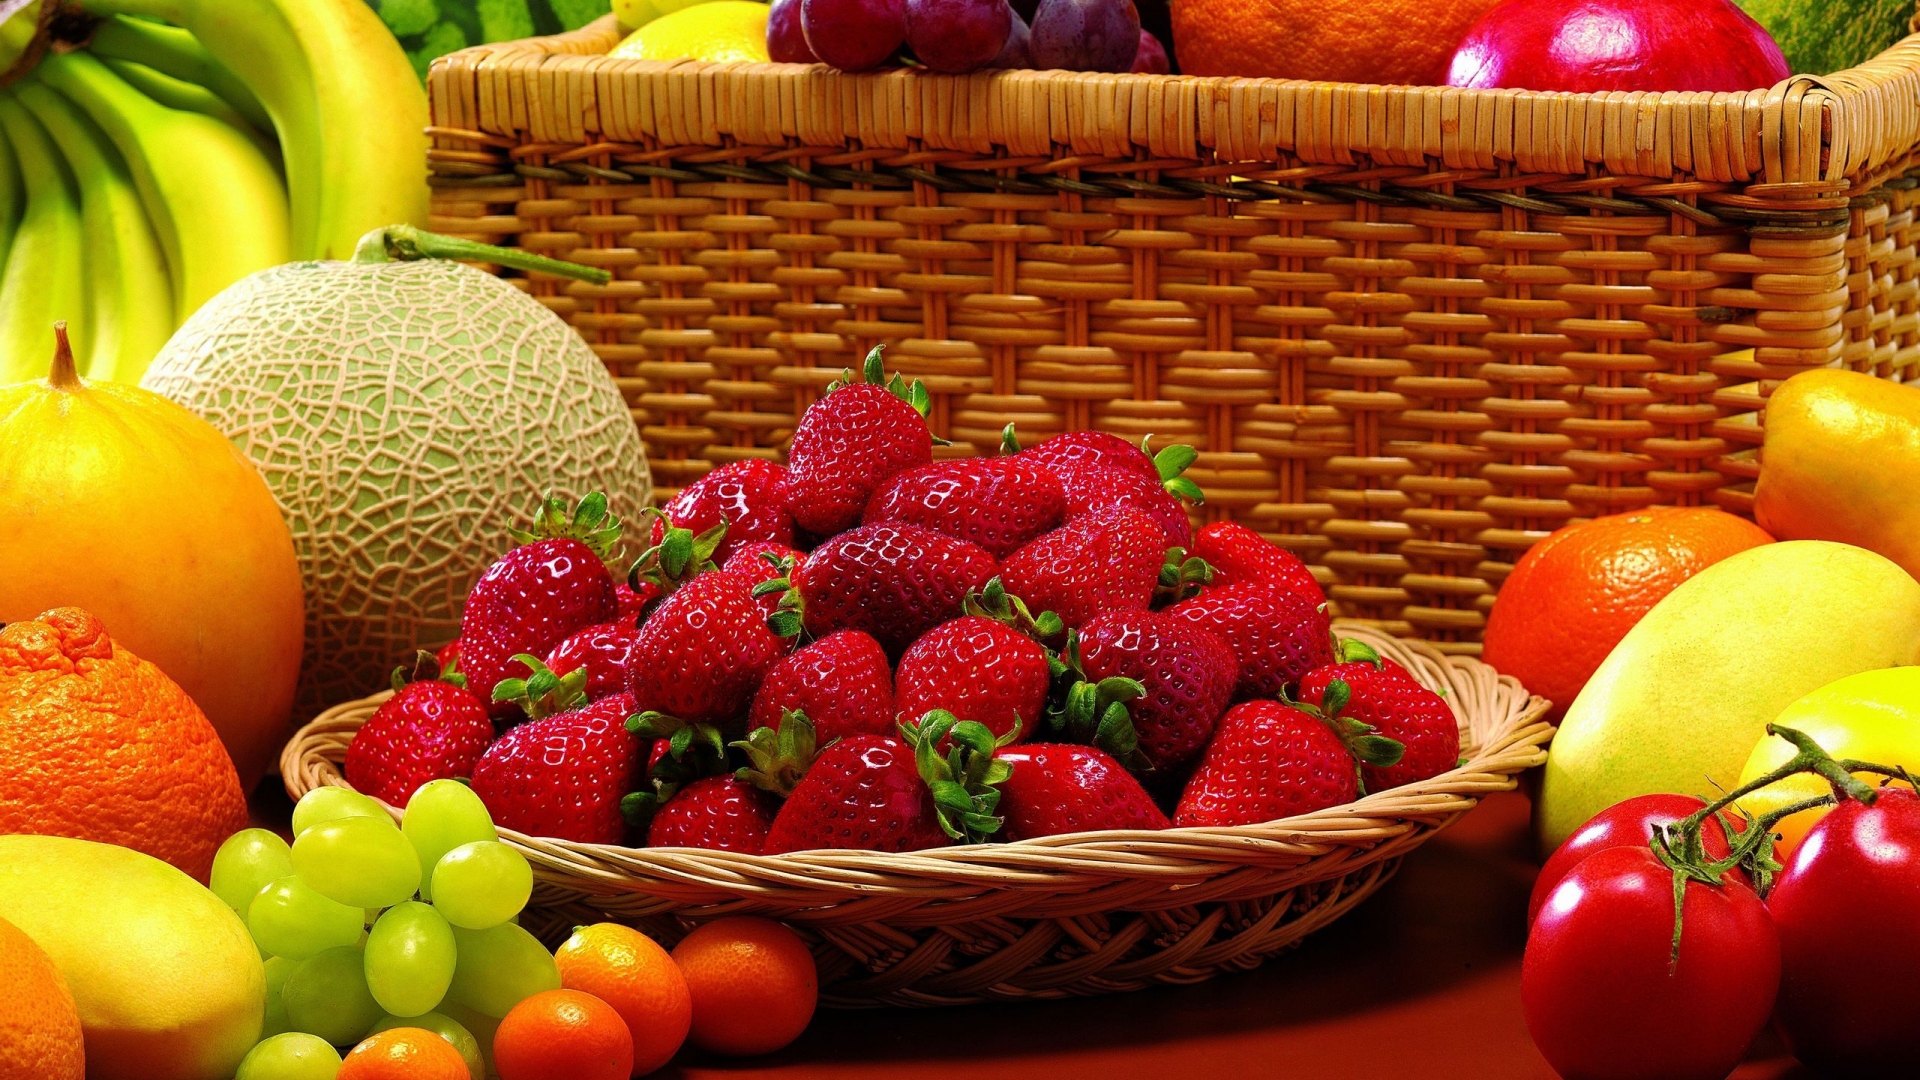 Amazing Fruits for 1920 x 1080 HDTV 1080p resolution